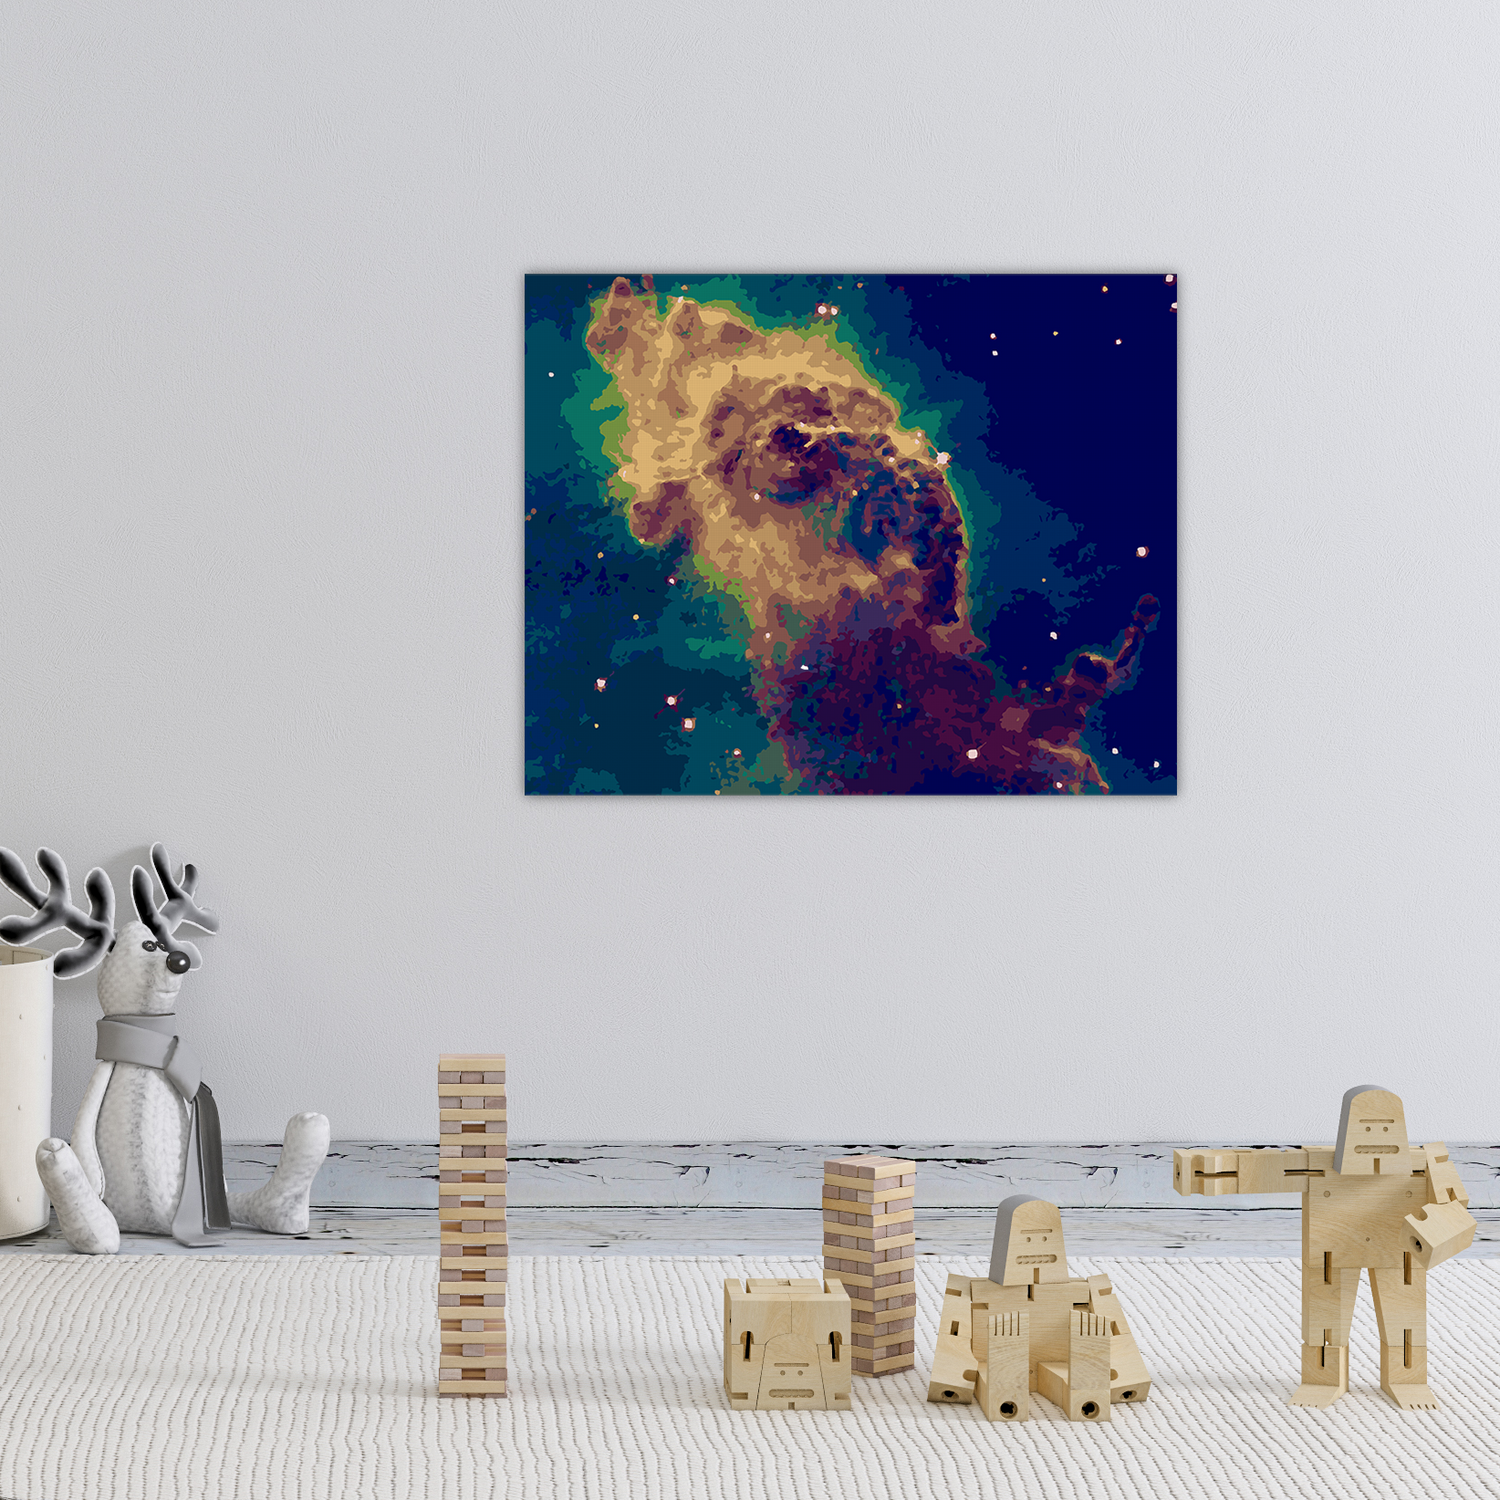 Nebula - Paint By Numbers Kit